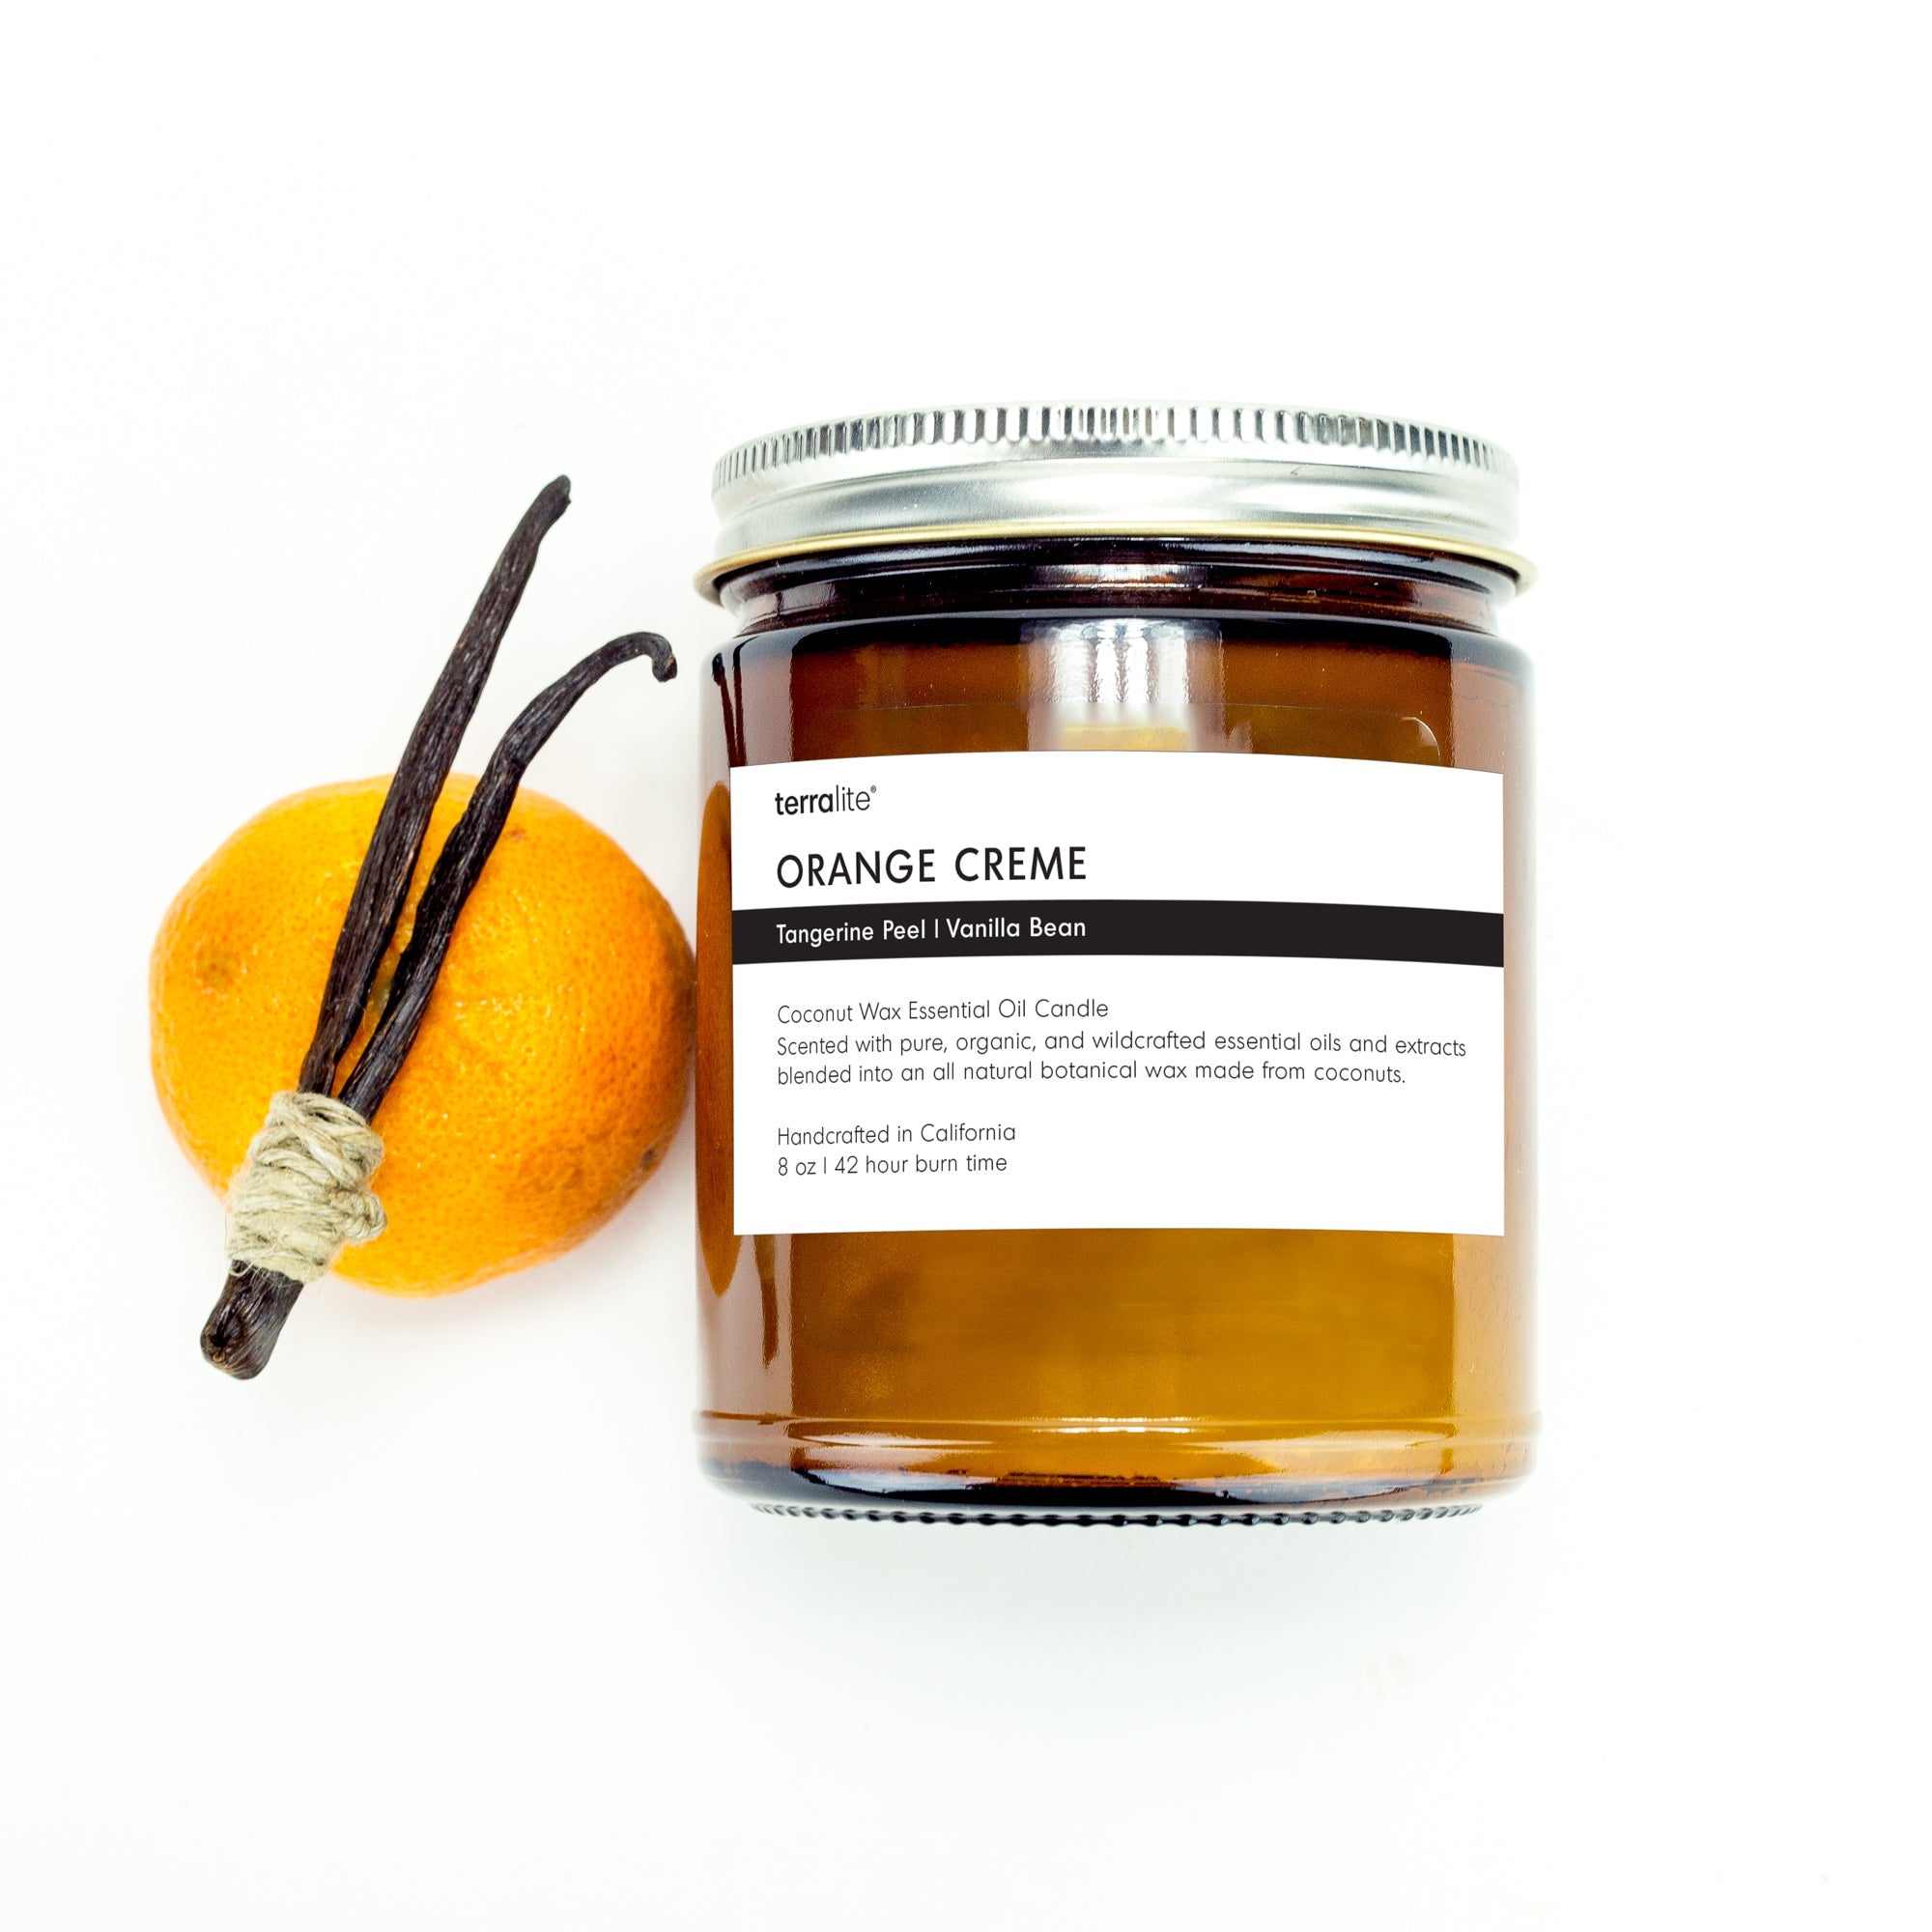 Orange Creme essential oil candle scented with Sweet Orange, Tangerine, and Vanilla essential oils and plant extracts.